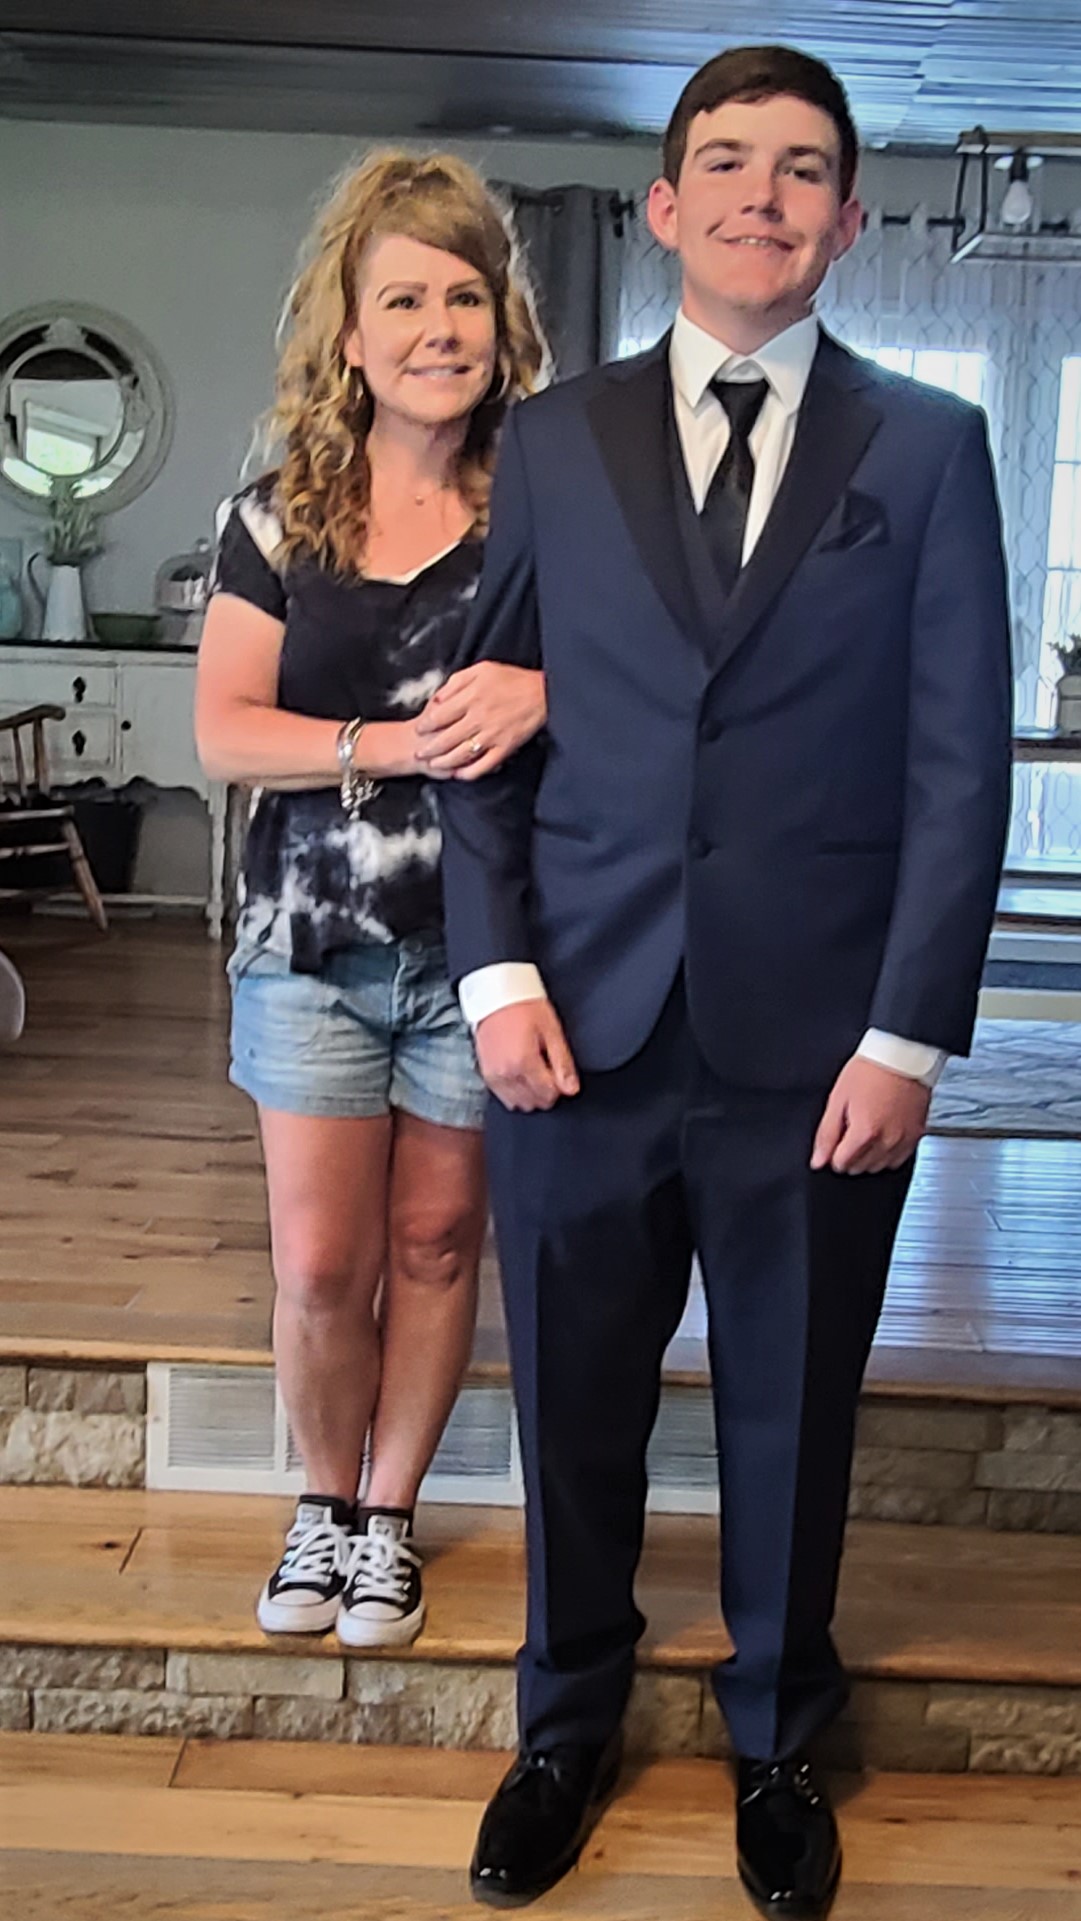 Tracy and her oldest son before a school dance.